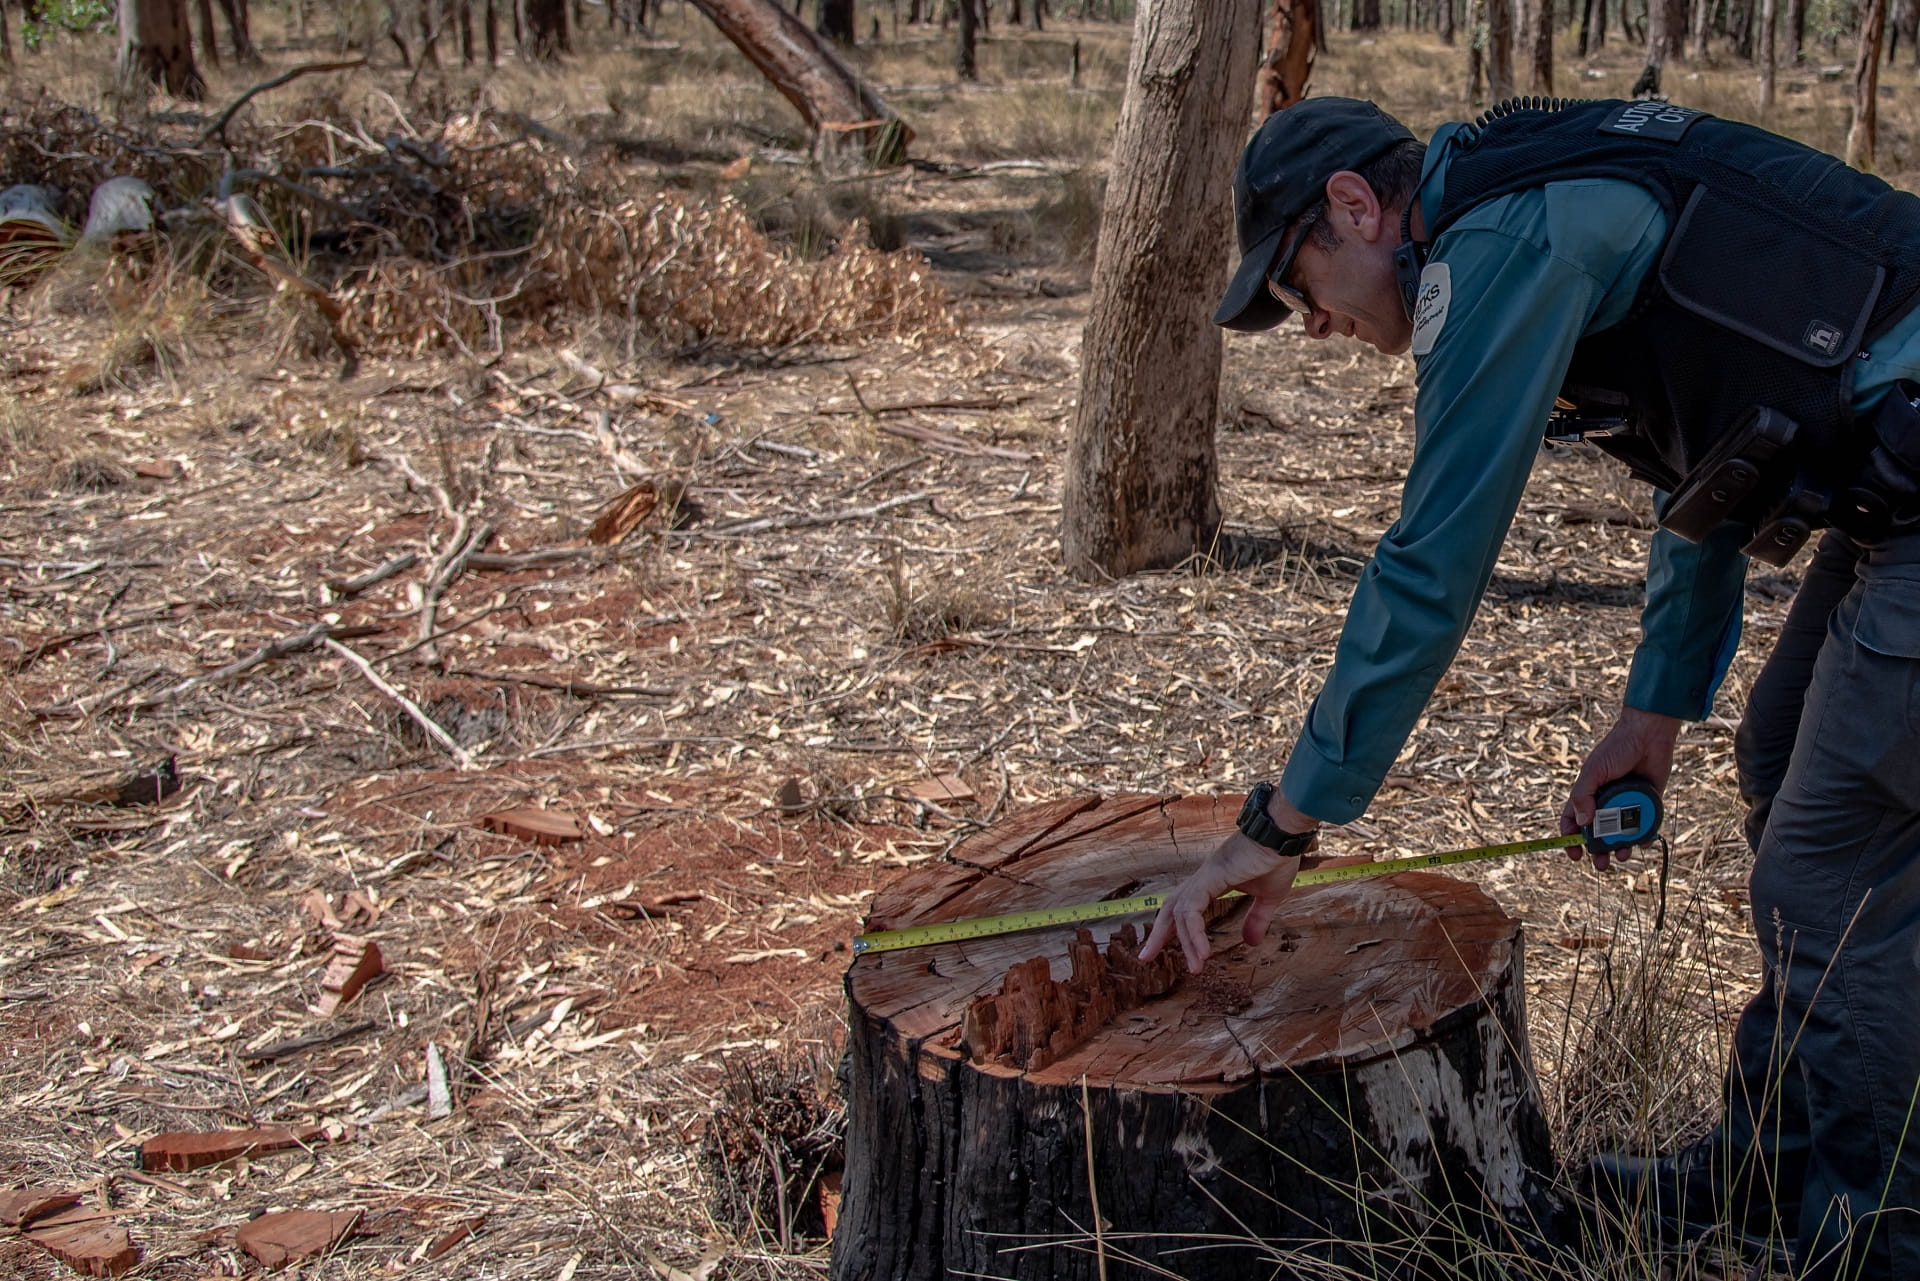 Parks Victoria Authorised Officer measures an illegally cut river red gum in Shepparton Regional Park